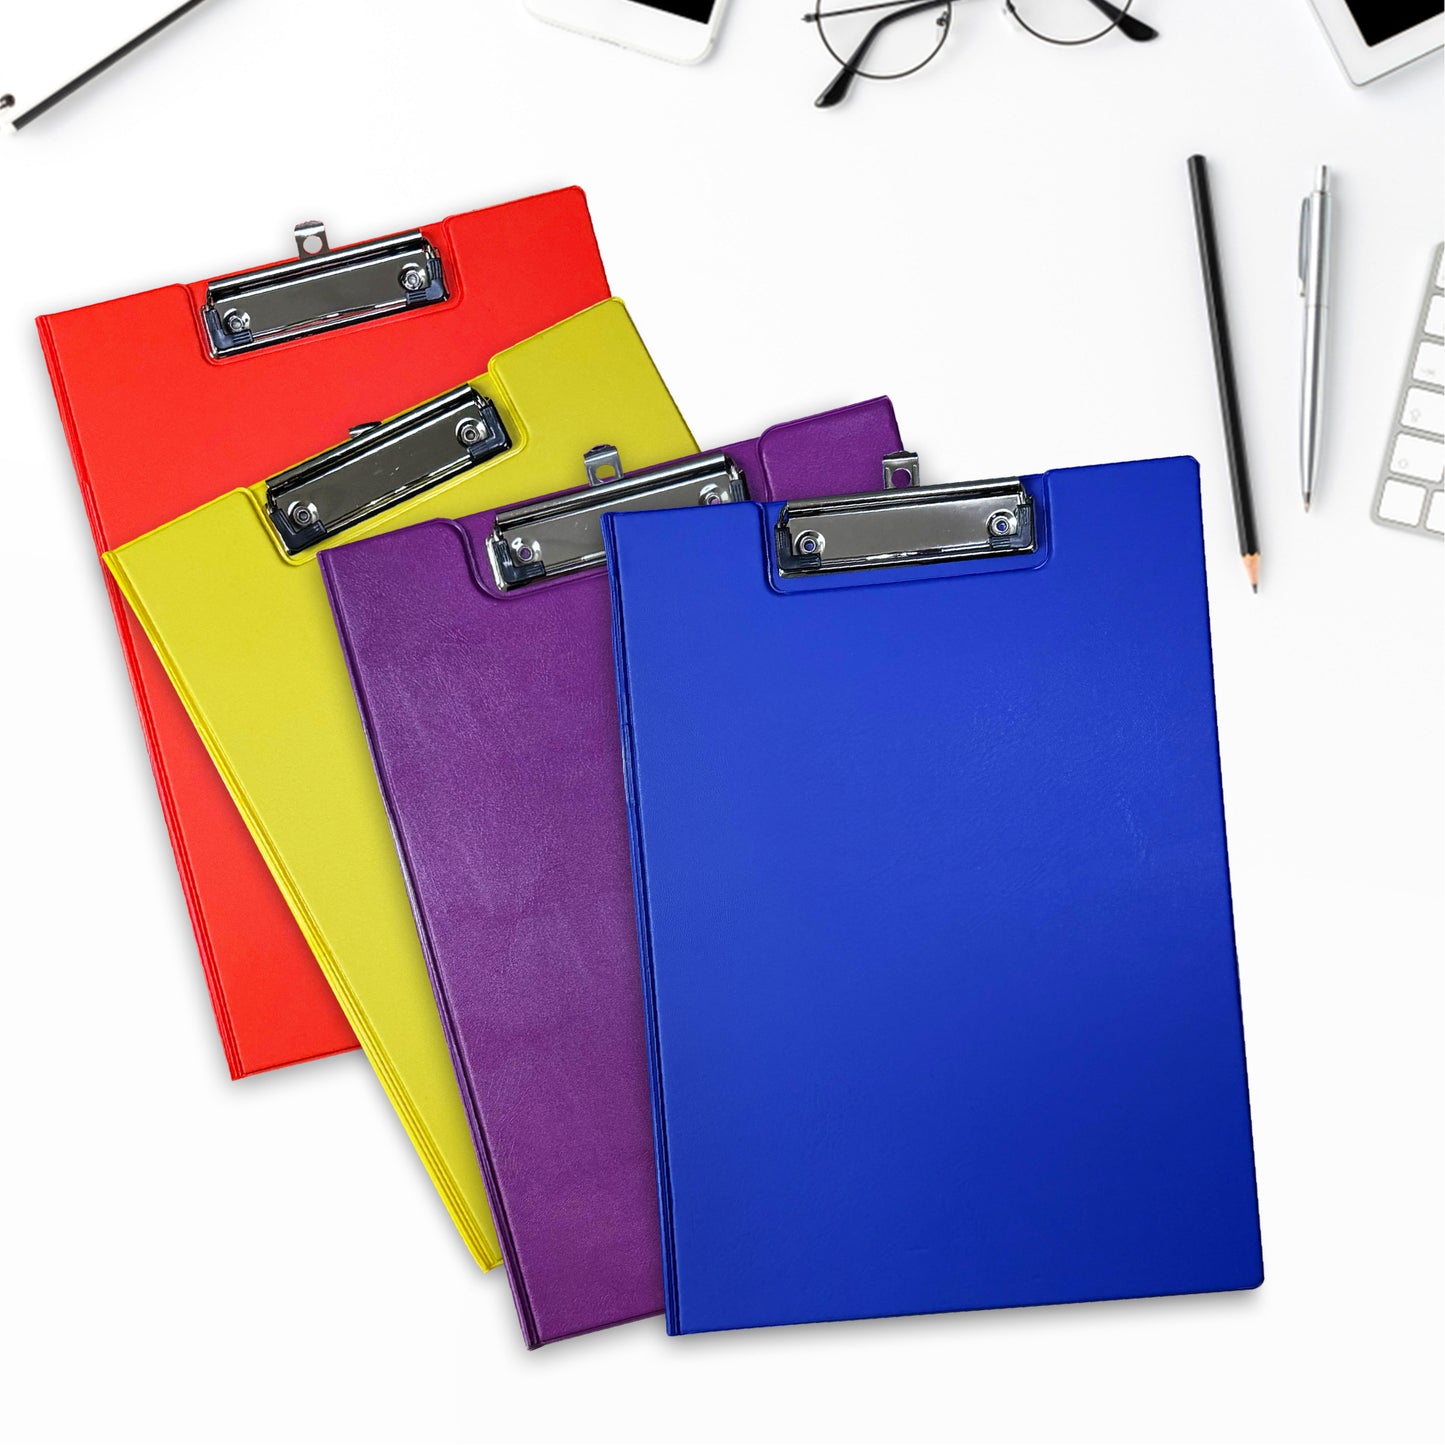 Pack of 6 A4 Light Blue Foldover Clipboards